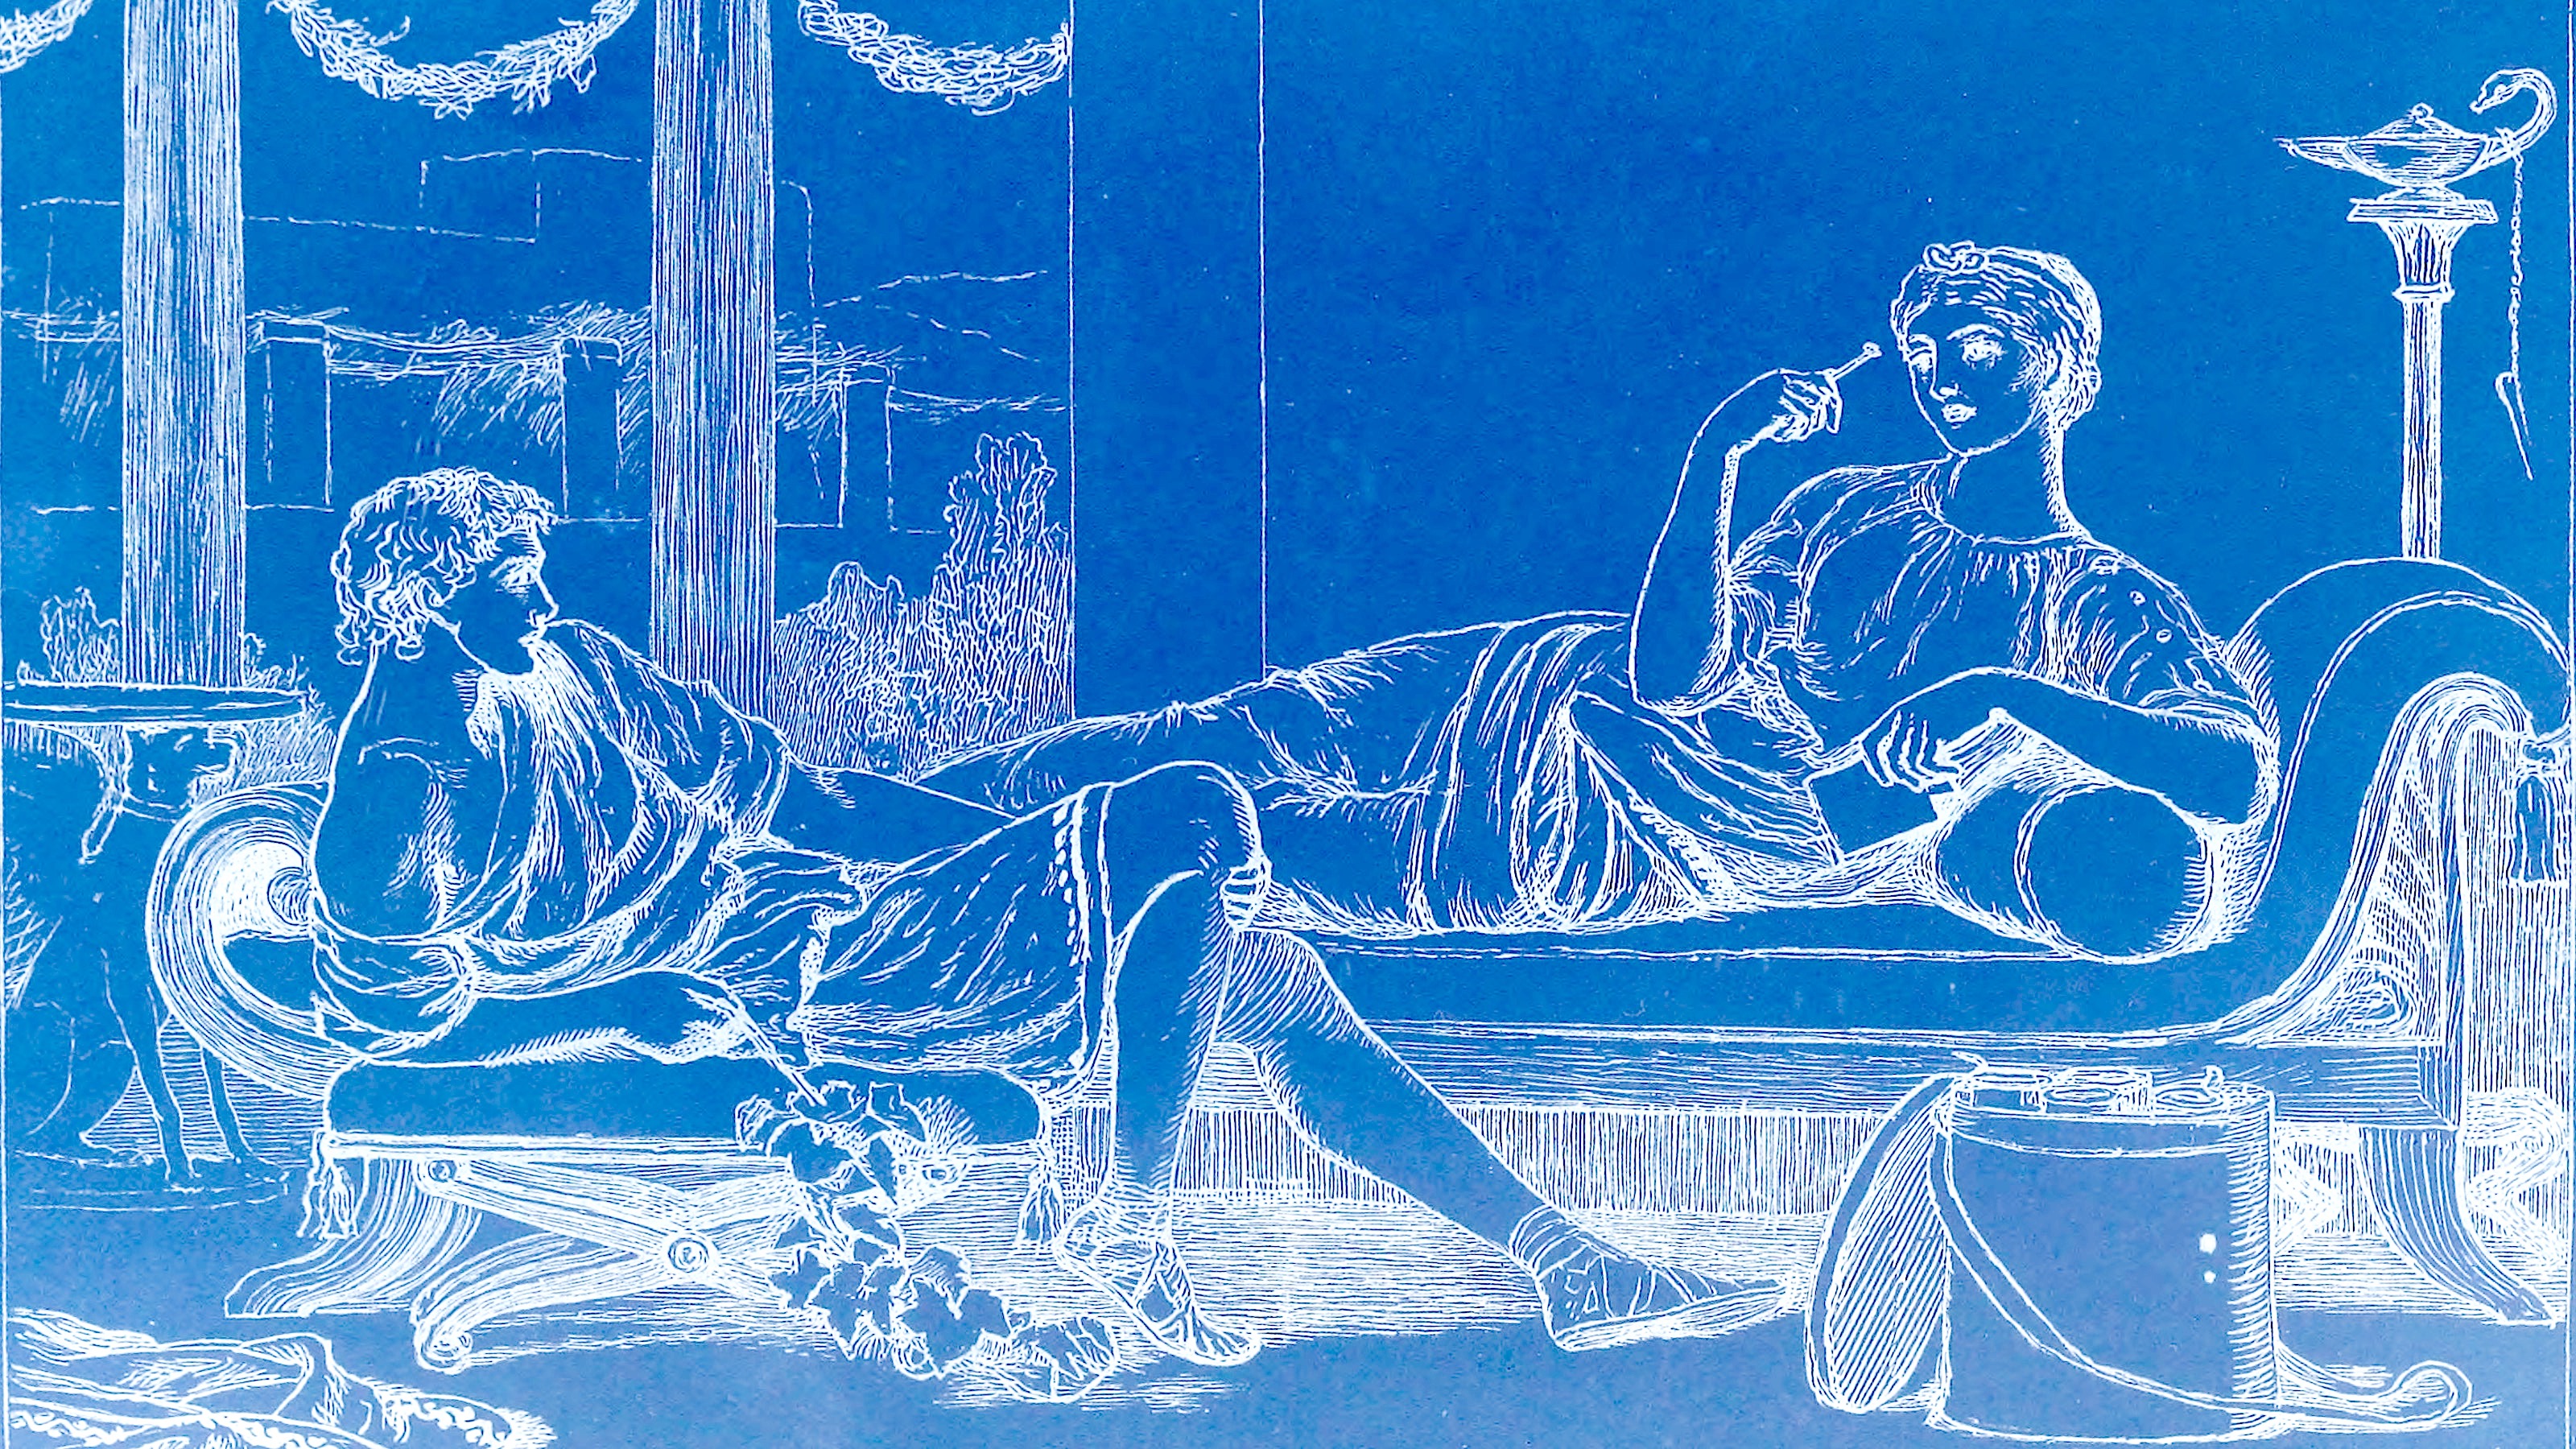 A drawing illustrating career success and empowerment through two people sitting on a couch.